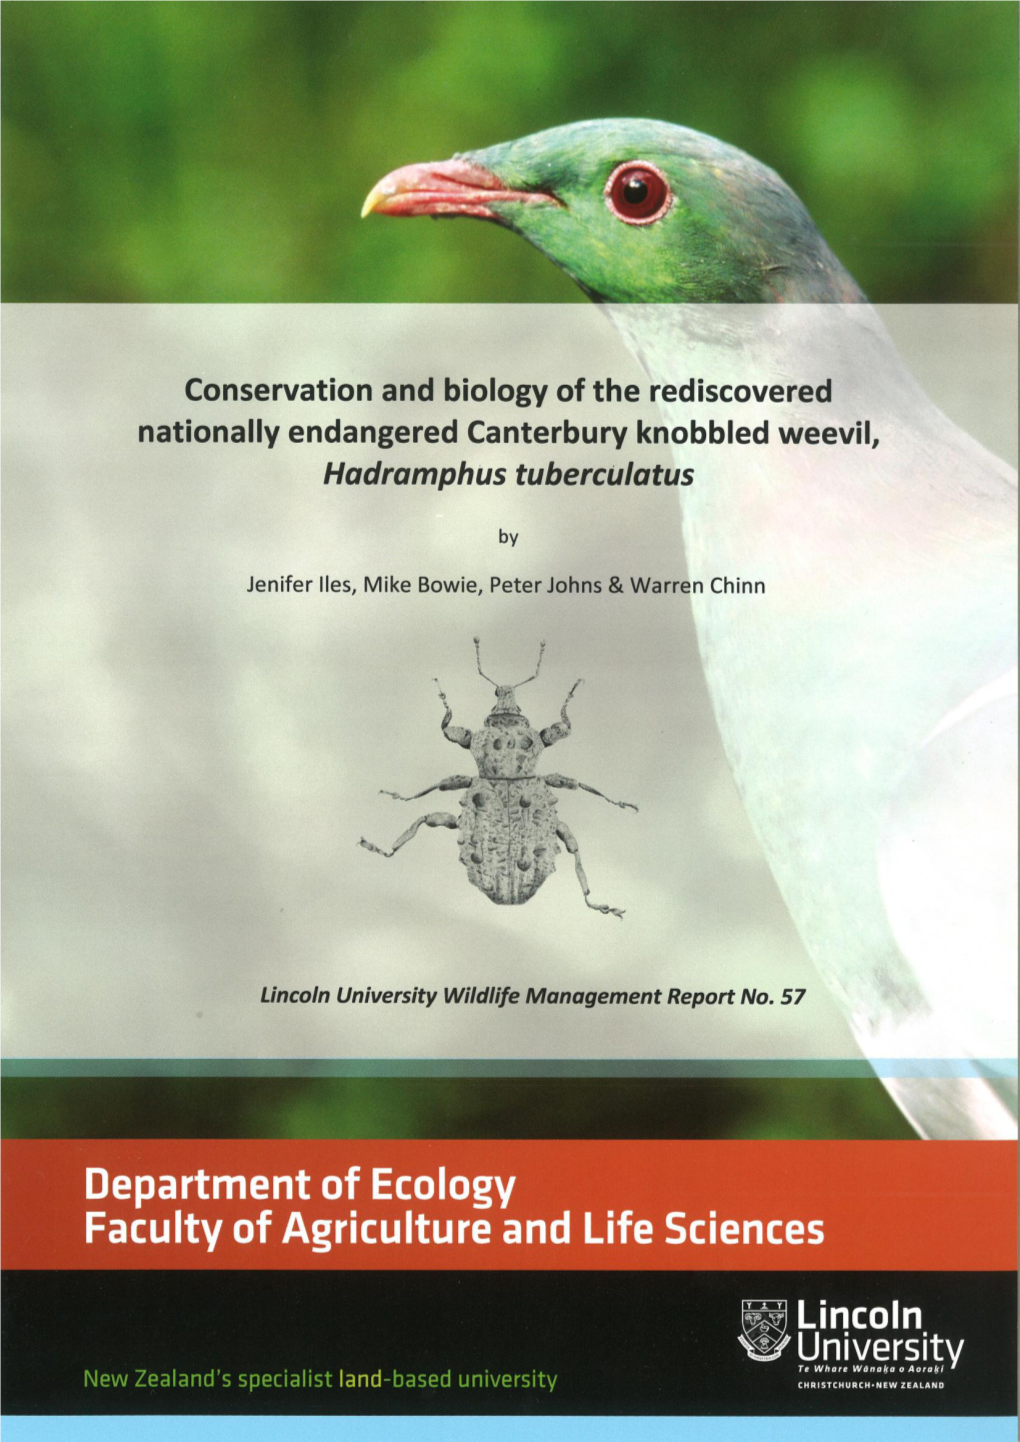 Conservation and Biology of the Rediscovered Nationally Endangered Canterbury Knobbled Weevil, Hadramphus Tuberculatus